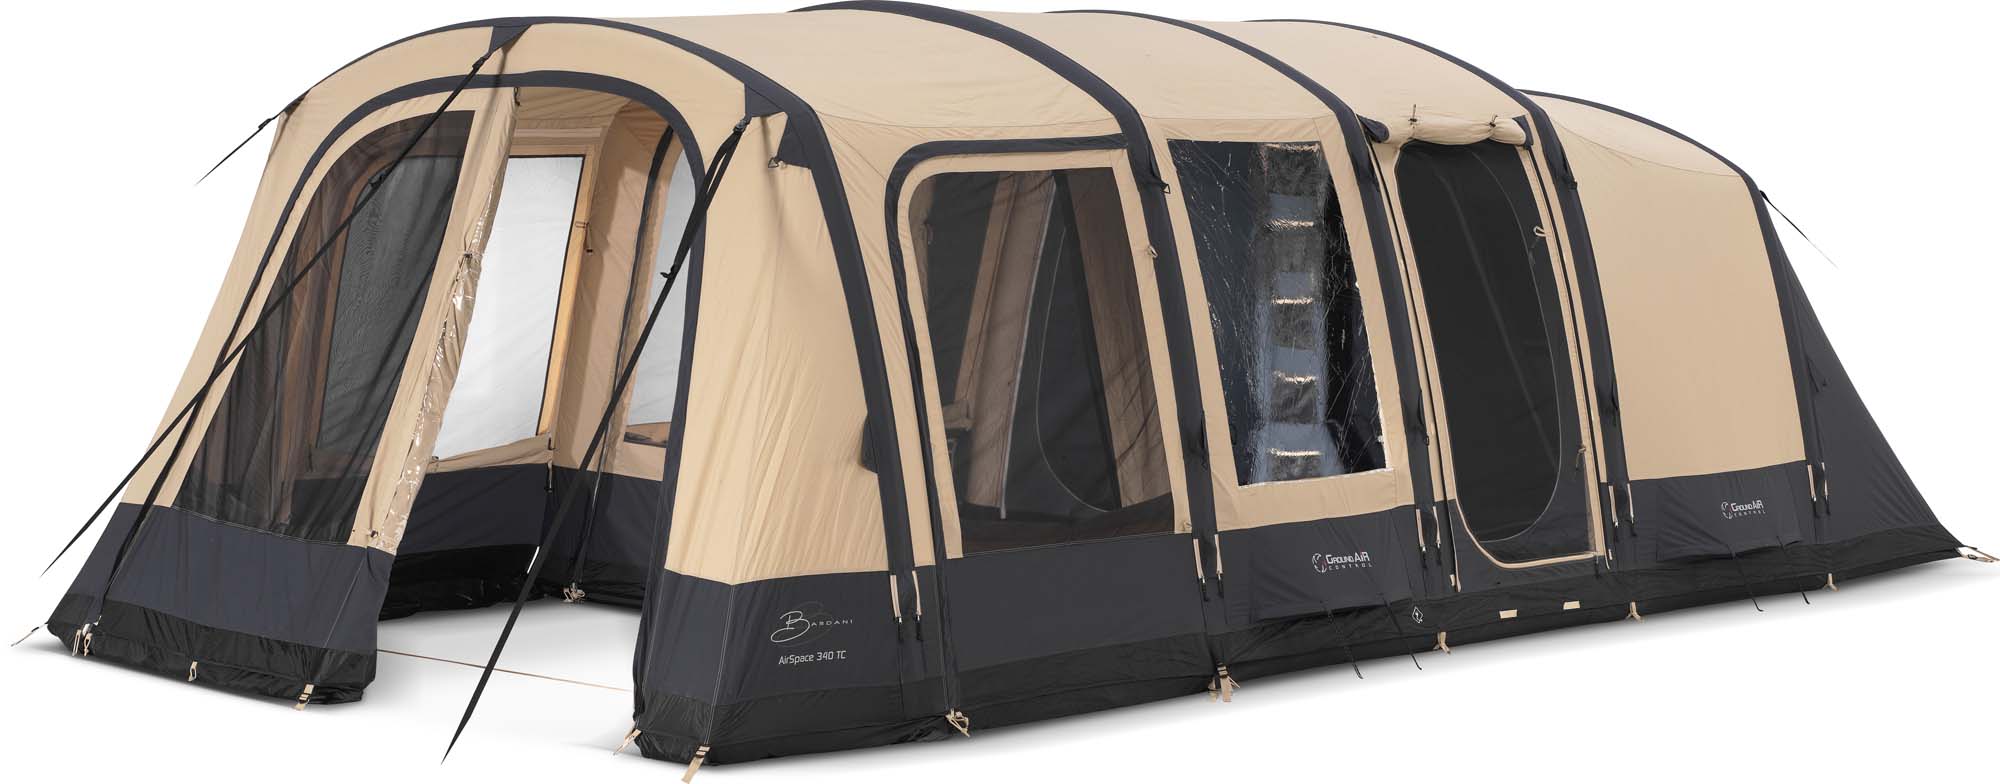 Airspace 340 TC Tent+Binnentent+Acc - Tunneltent